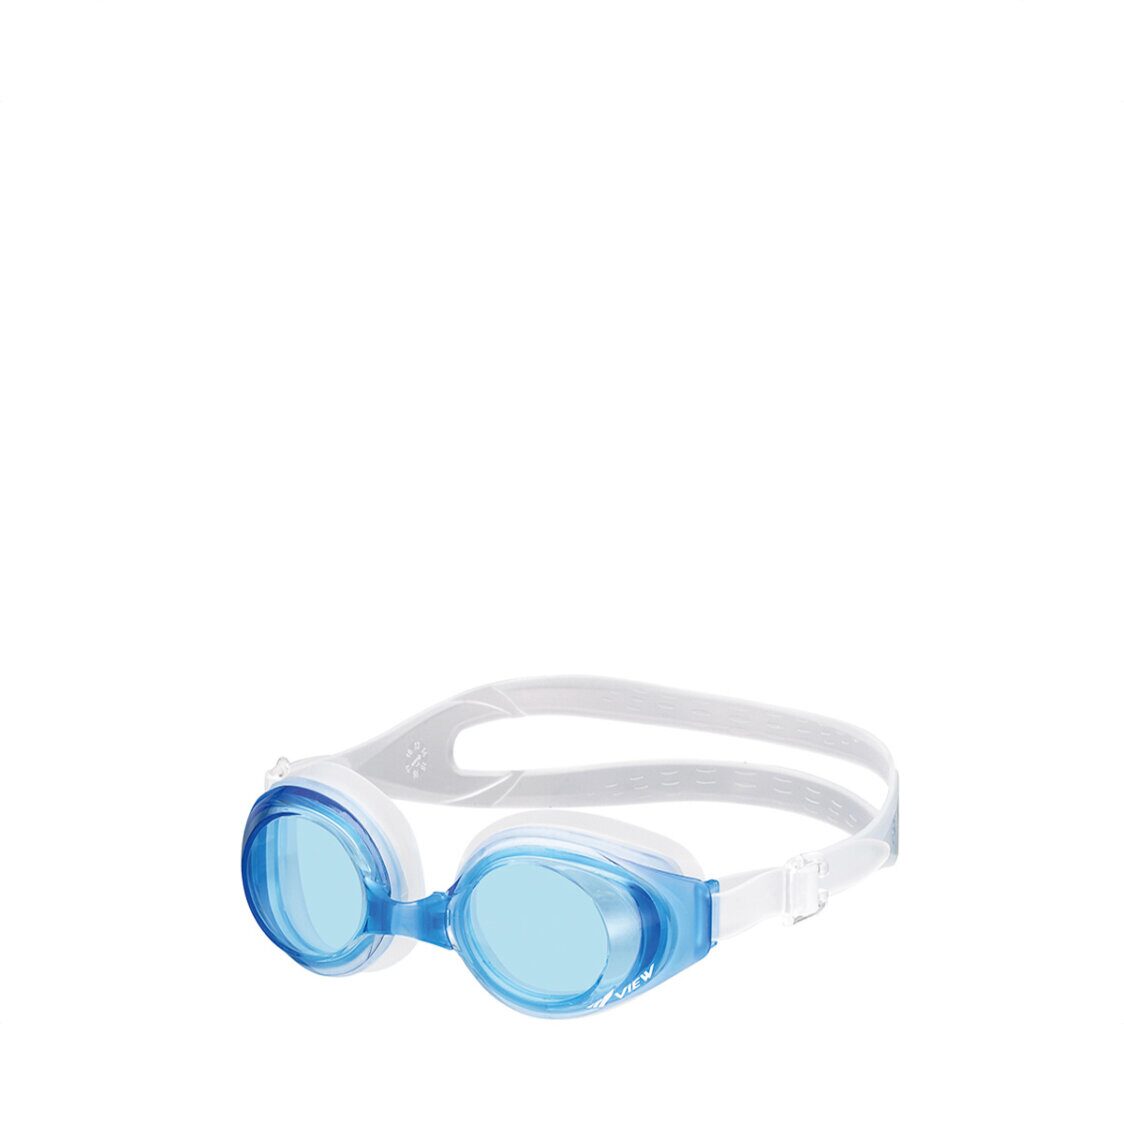 View Adult Goggle Clear Blue AAV610